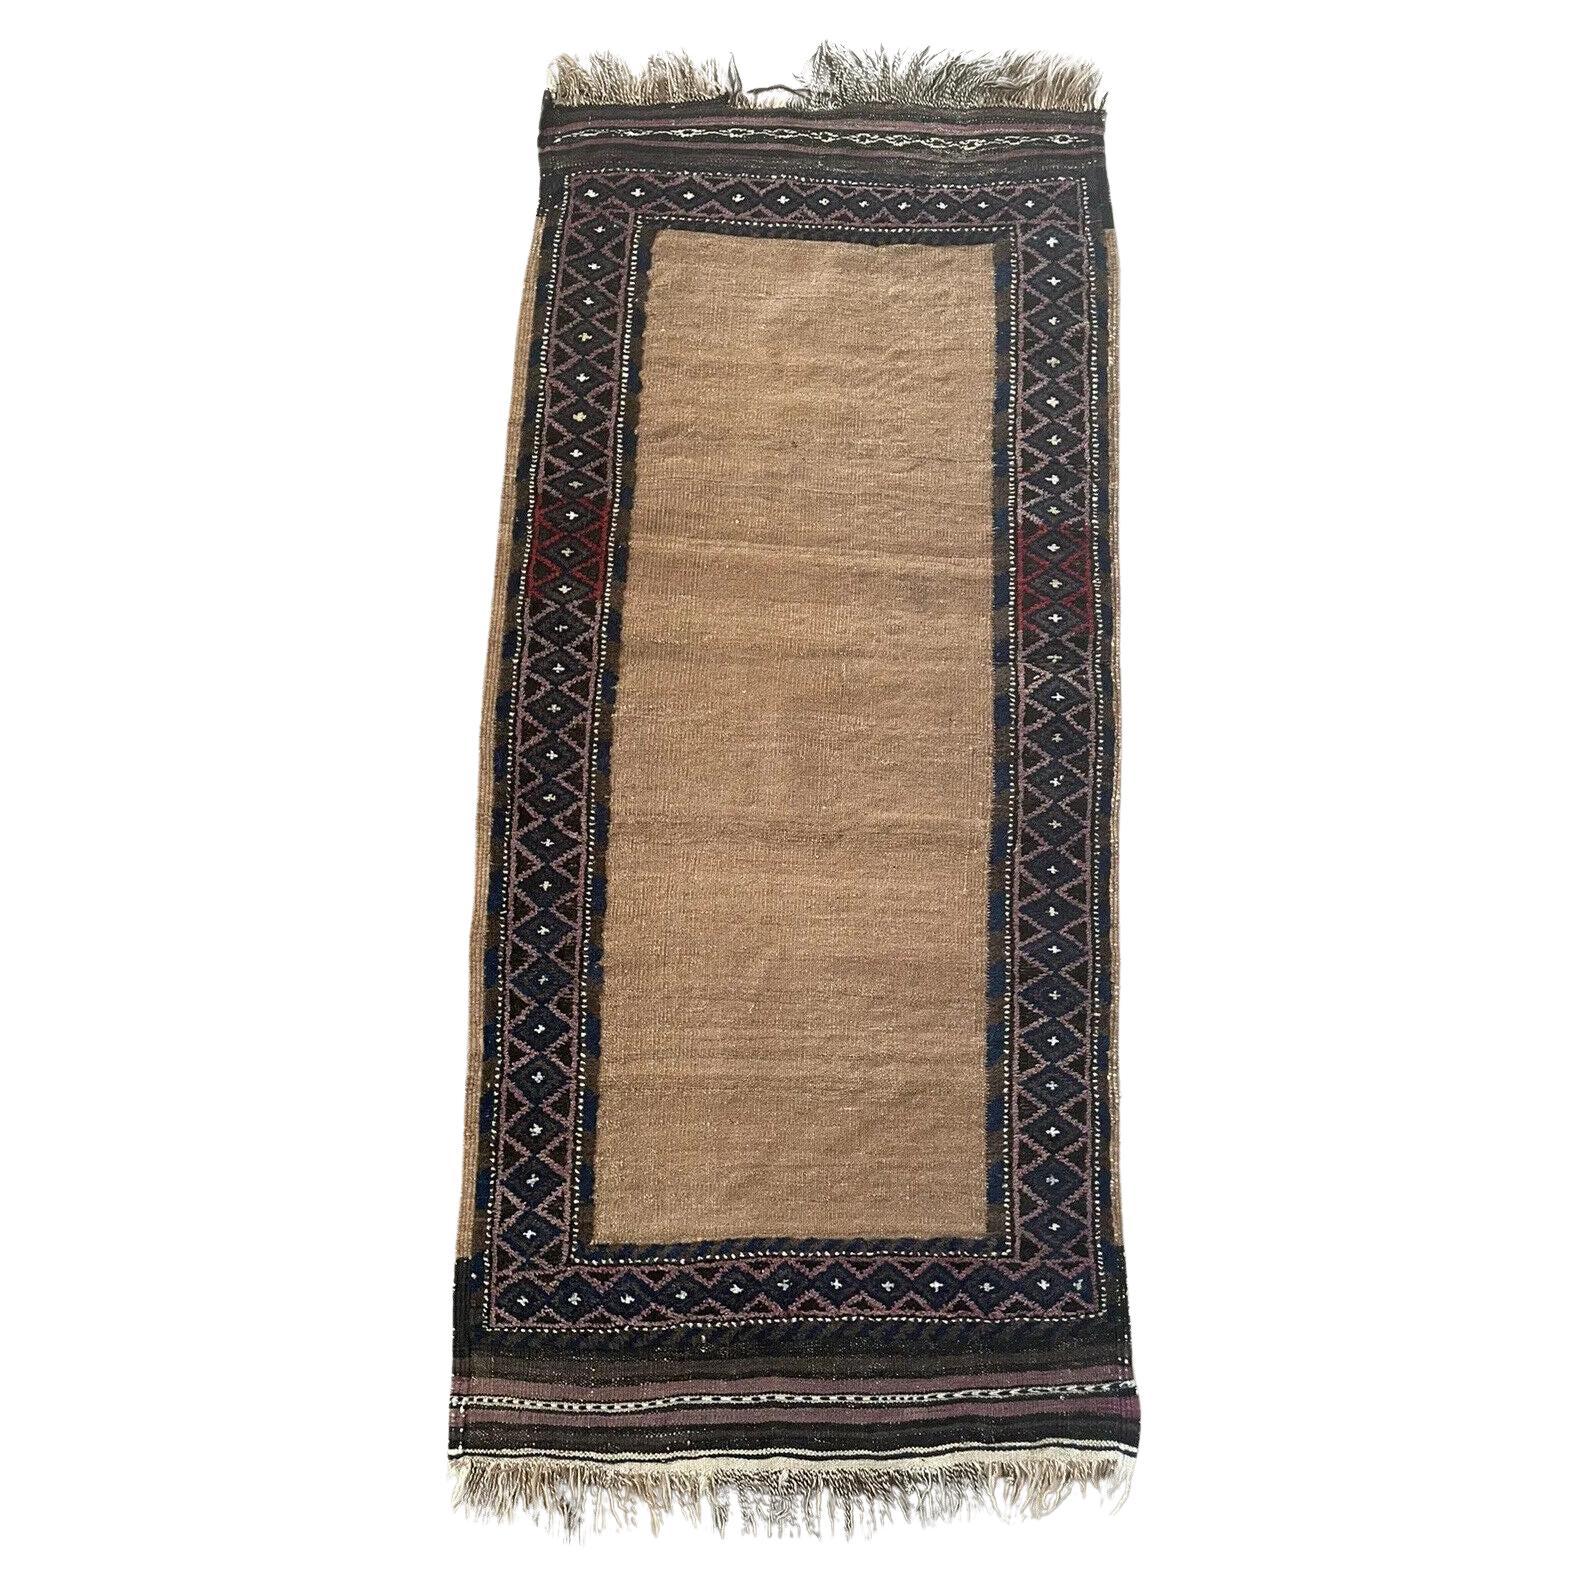 Handmade Antique Afghan Baluch Collectible Rug 2.3' x 5', 1920s - 1N12